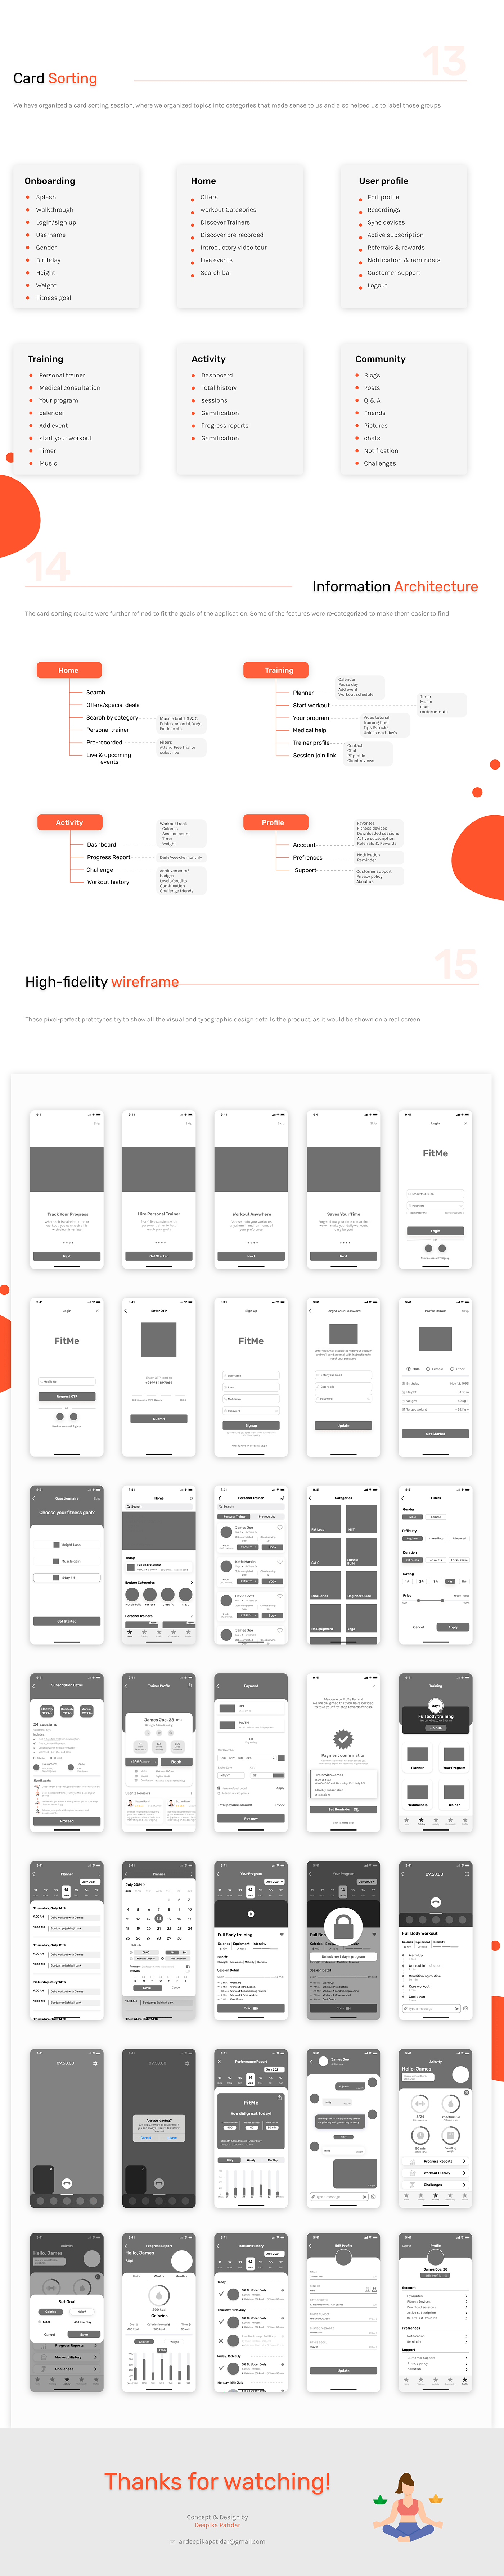 UI/UX user experience UX Case Study